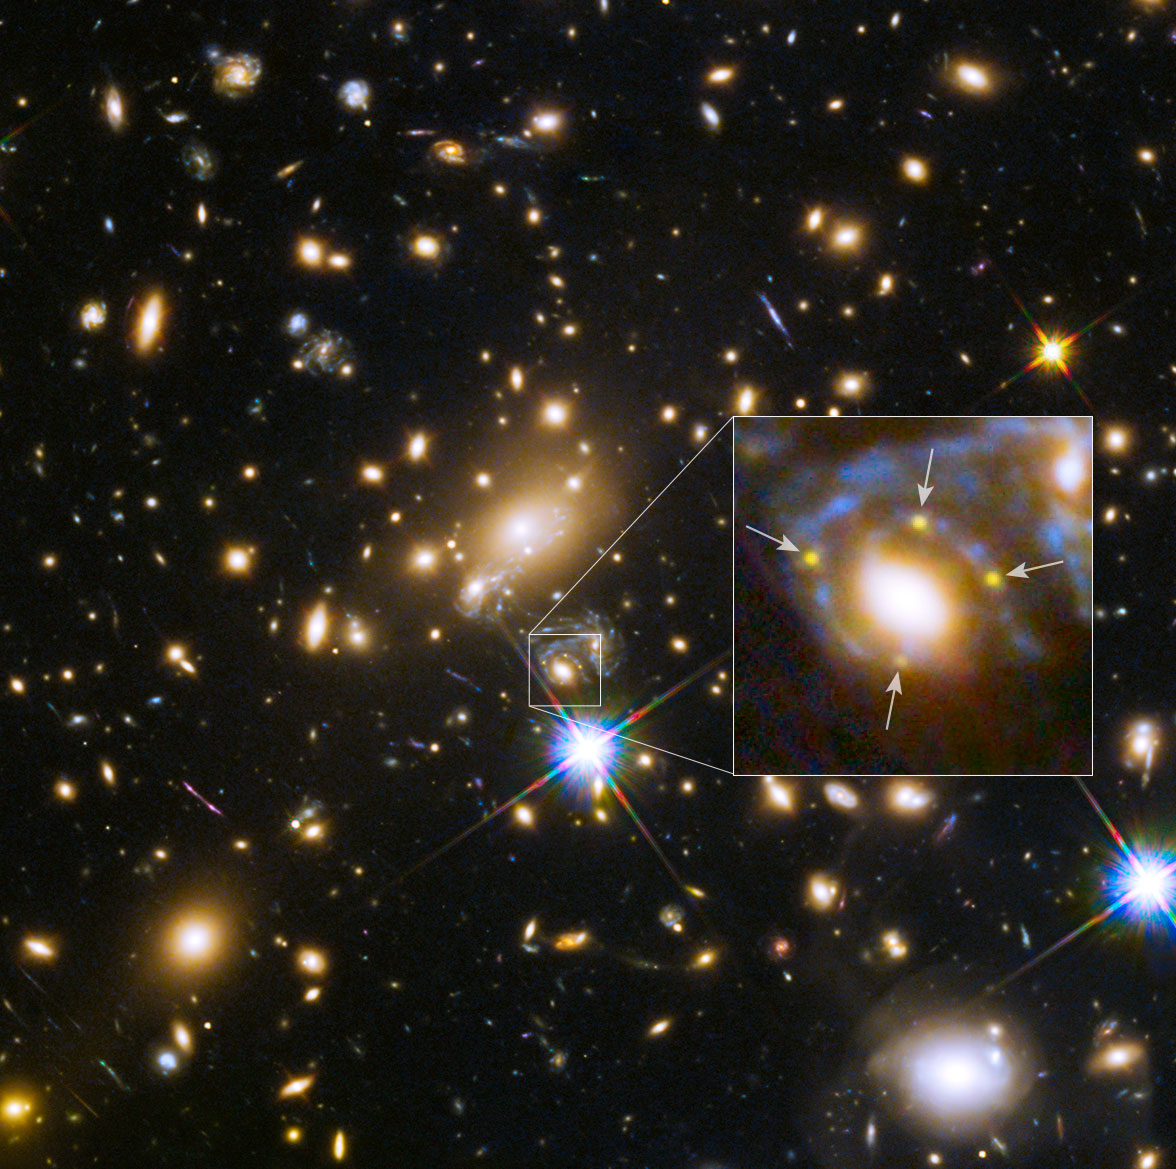 Astronomers using the Hubble Space Telescope have, for the first time, spotted four images of a distant exploding star. The images are arranged in a cross-shaped pattern by the powerful gravity of a foreground galaxy embedded in a massive cluster of galaxies. A close-up of the Einstein cross is shown in the inset. Credit: NASA, ESA, S. Rodney (John Hopkins University, USA) and the FrontierSN team; T. Treu (University of California Los Angeles, USA), P. Kelly (University of California Berkeley, USA) and the GLASS team; J. Lotz (STScI) and the Frontier Fields team; M. Postman (STScI) and the CLASH team; and Z. Levay (STScI)